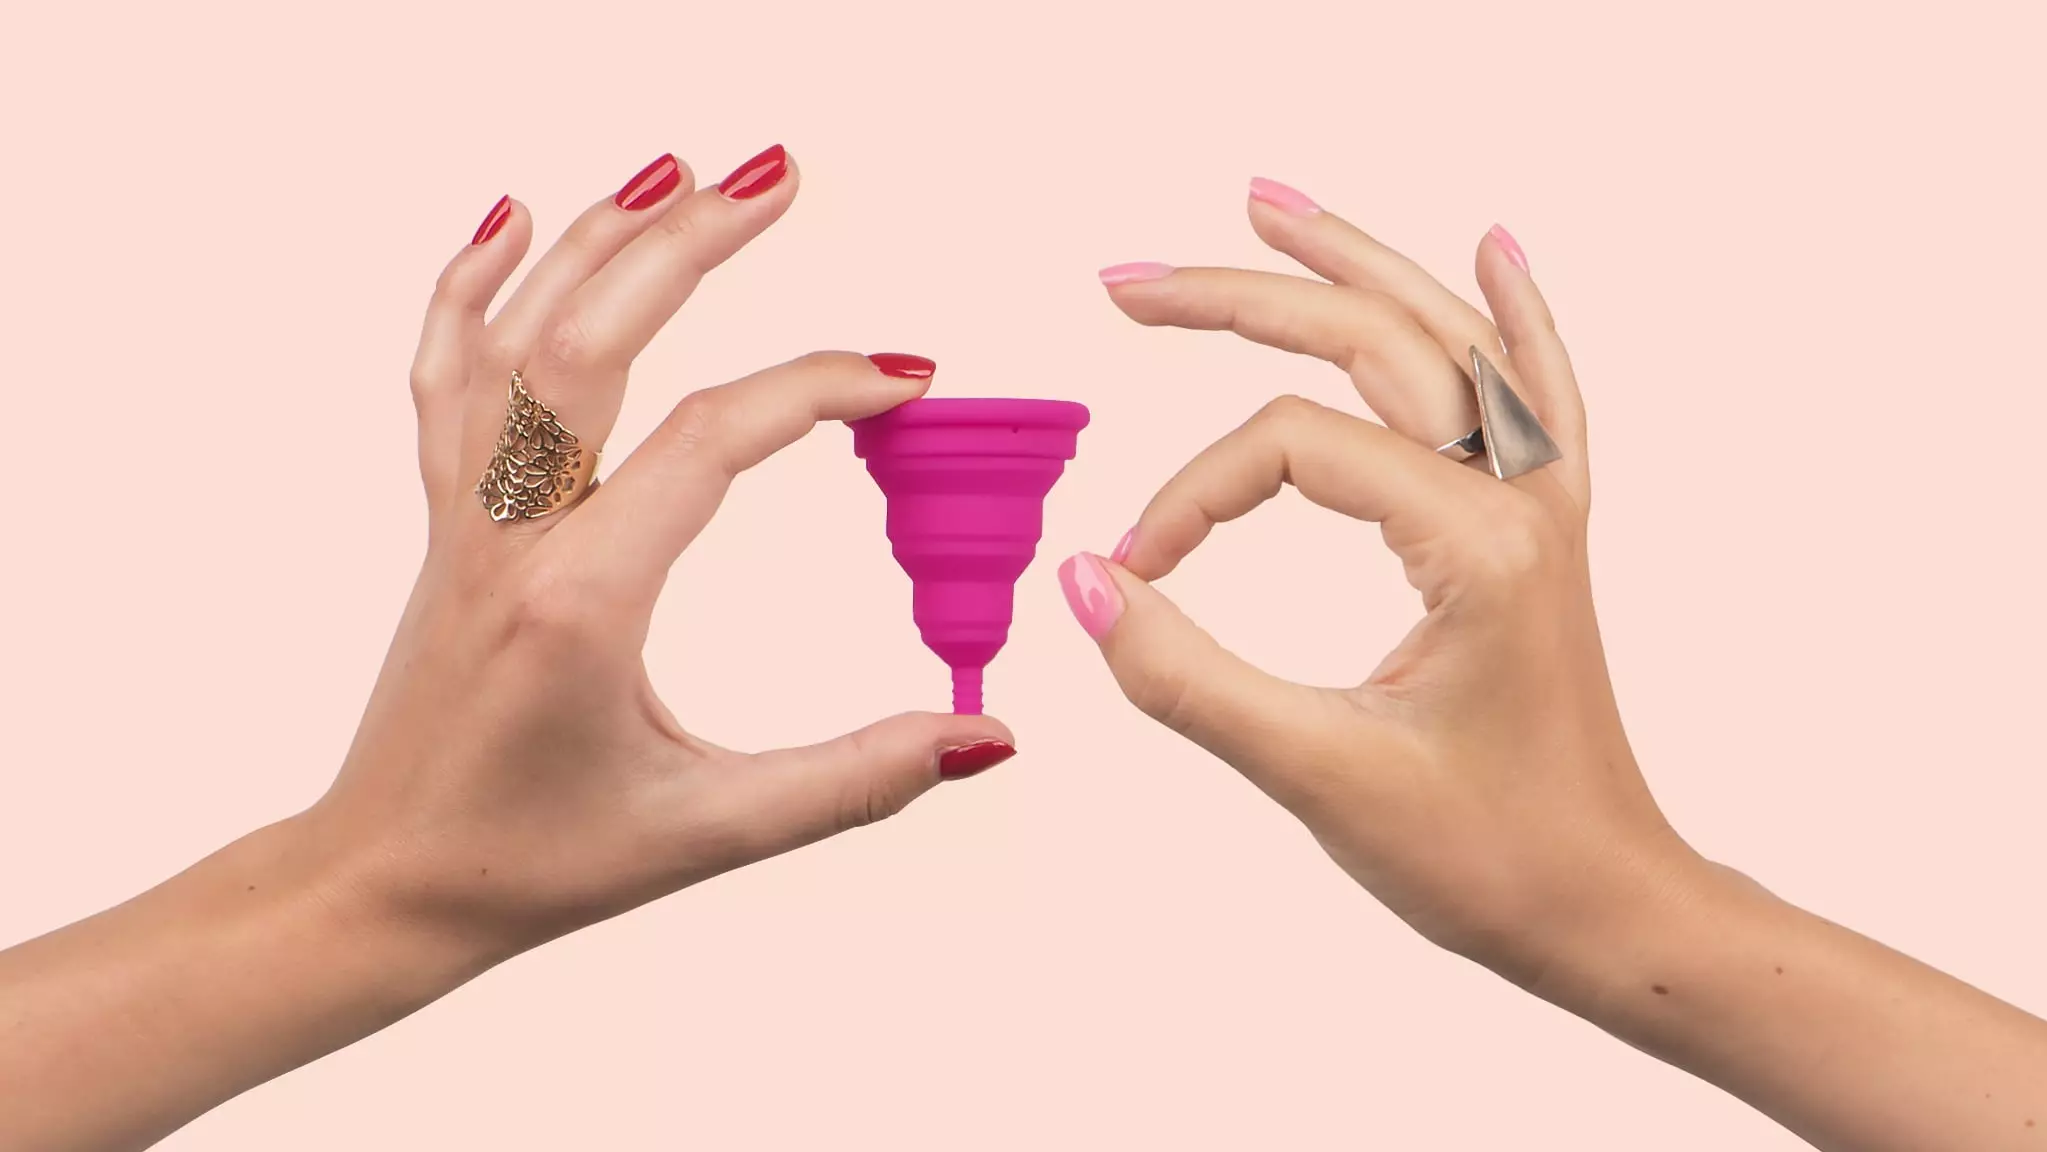 Menstrual Cup Misuse 'Could Cause Pelvic Organ Prolapse', Say Experts